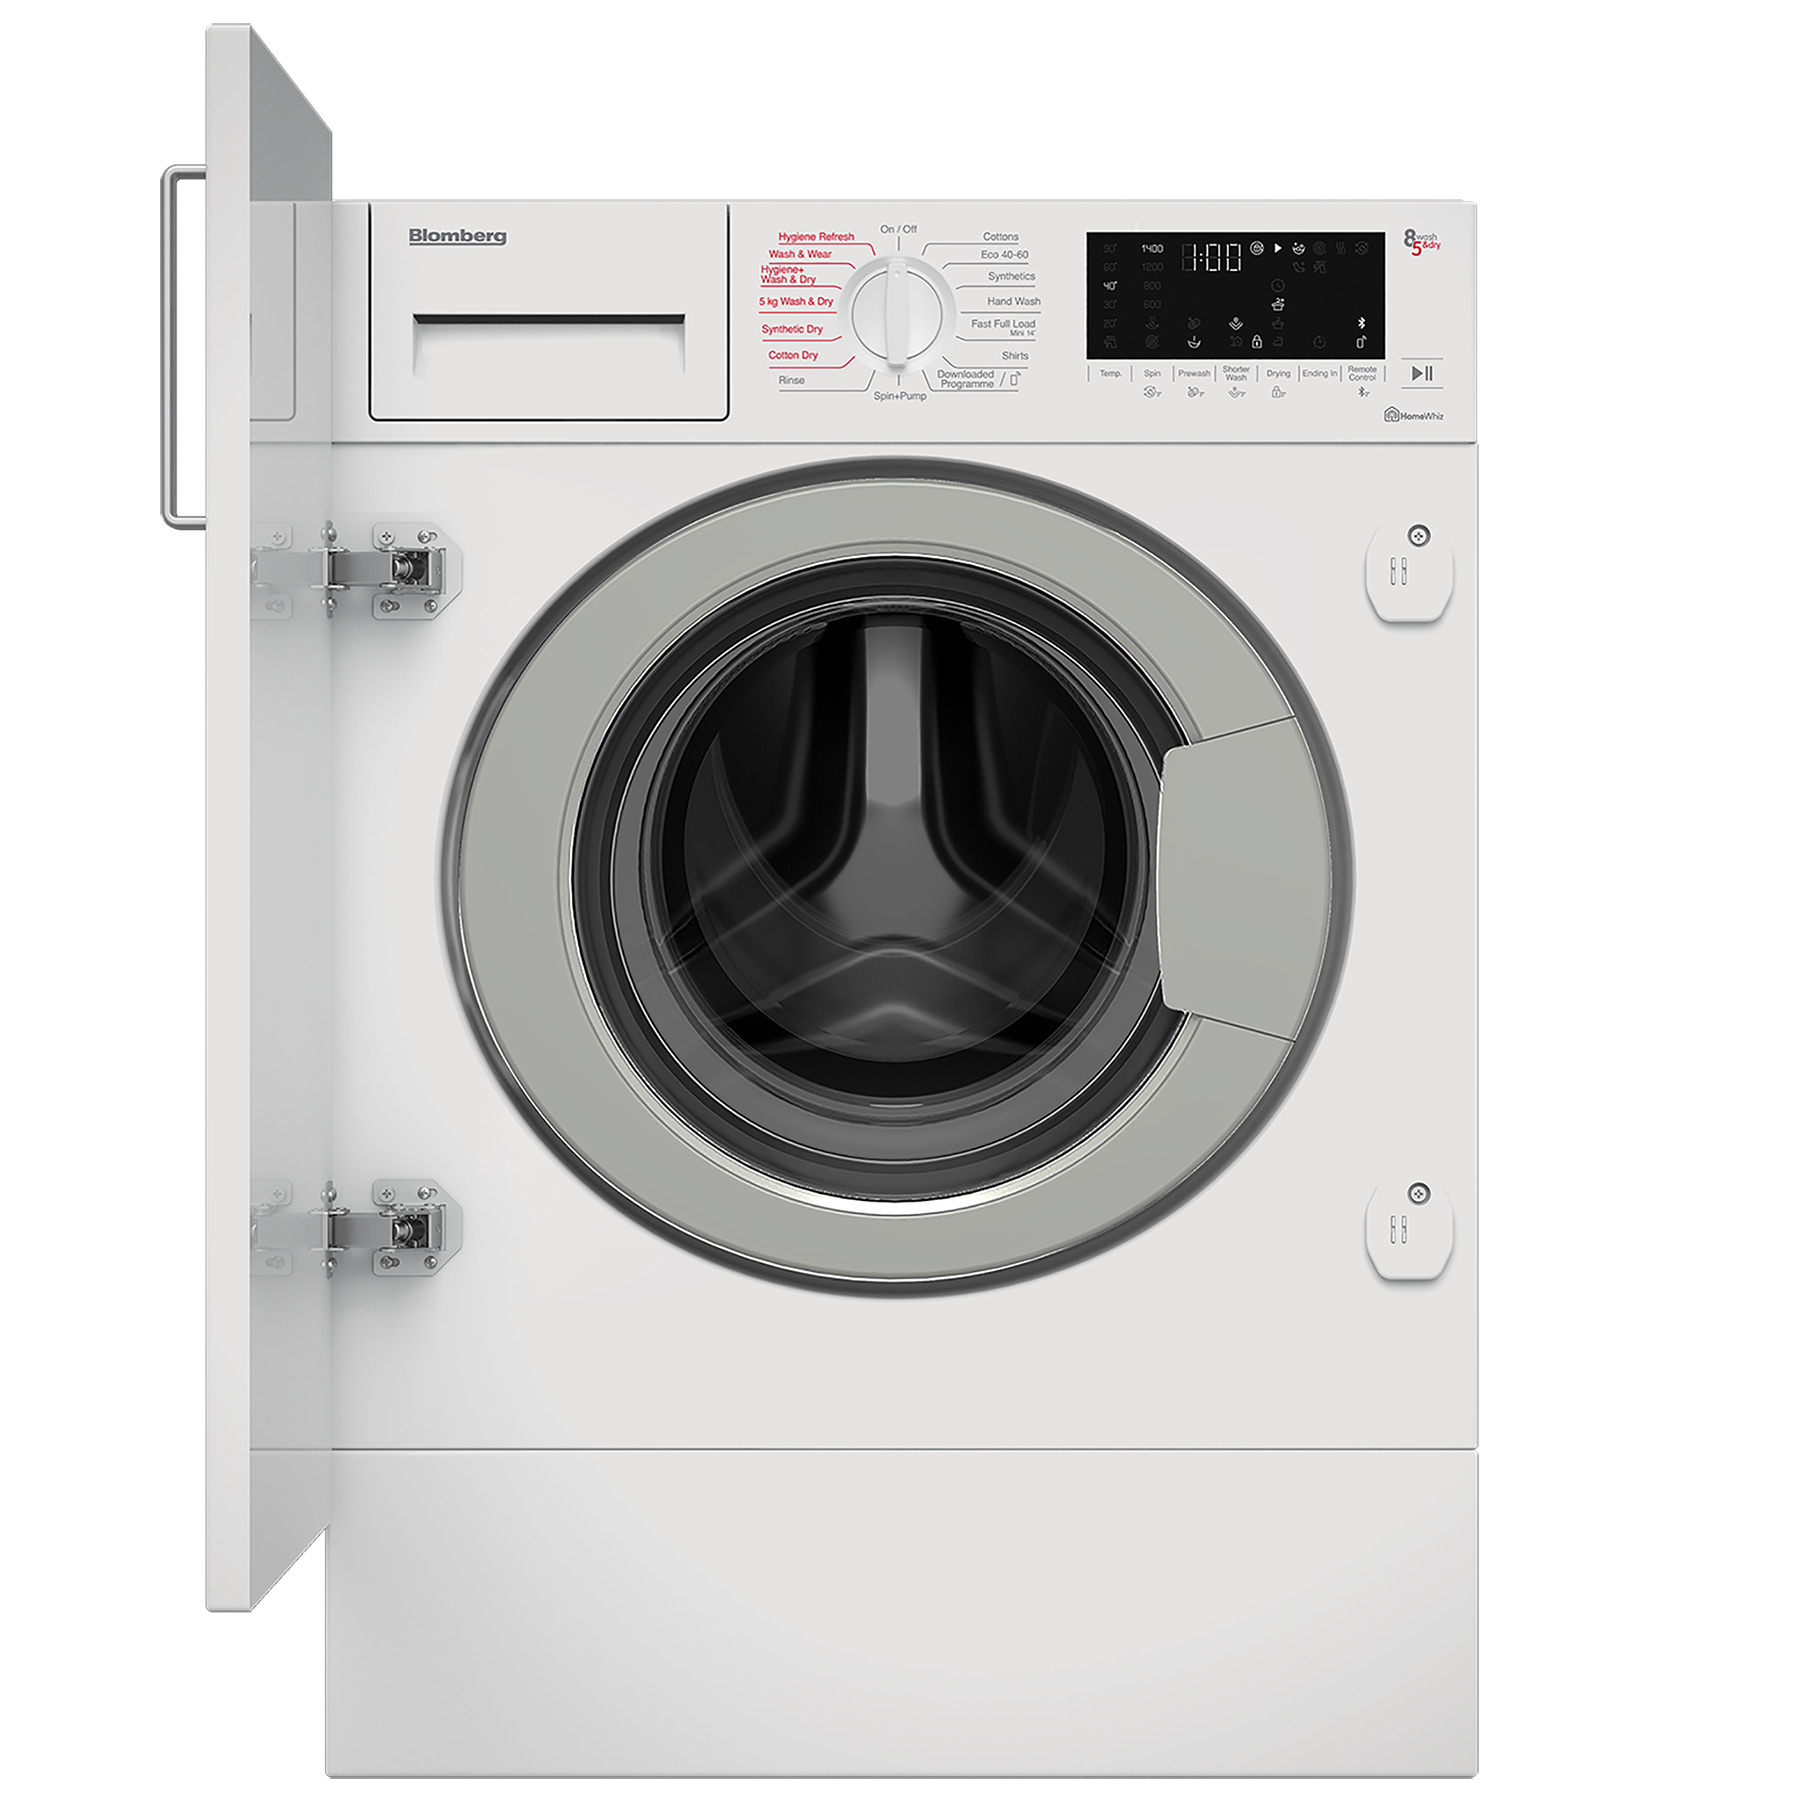 Image of Blomberg LRI1854310 Integrated Washer Dryer 1400rpm 8kg 5kg D Rated